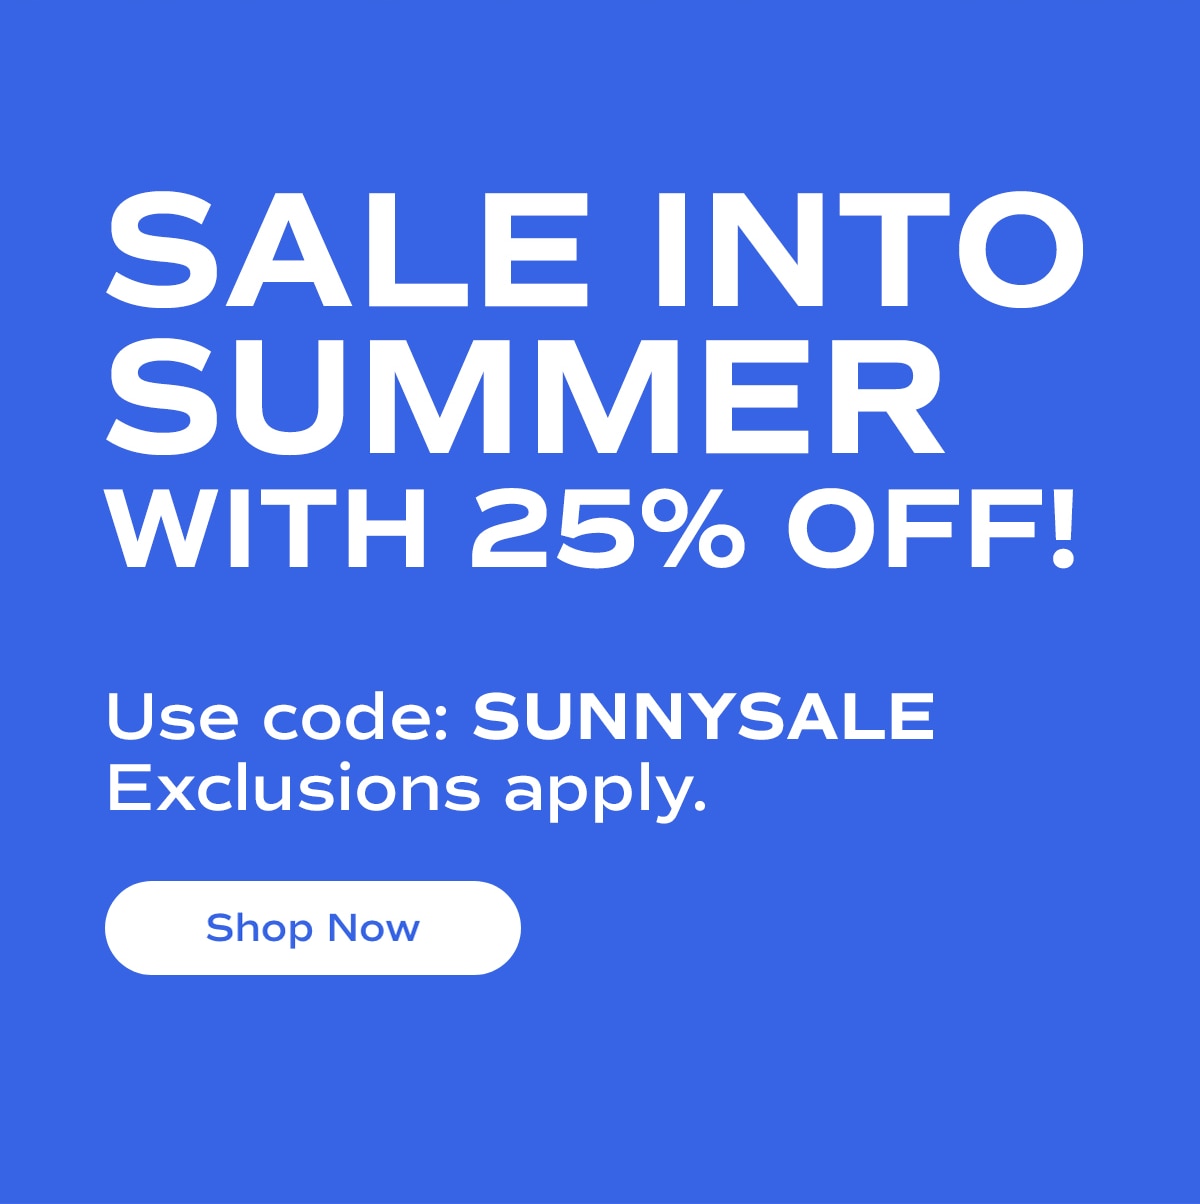 SALE INTO SUMMER WITH 25% OFF! | Use code: SUNNYSALE | Exclusions apply. | Shop Now